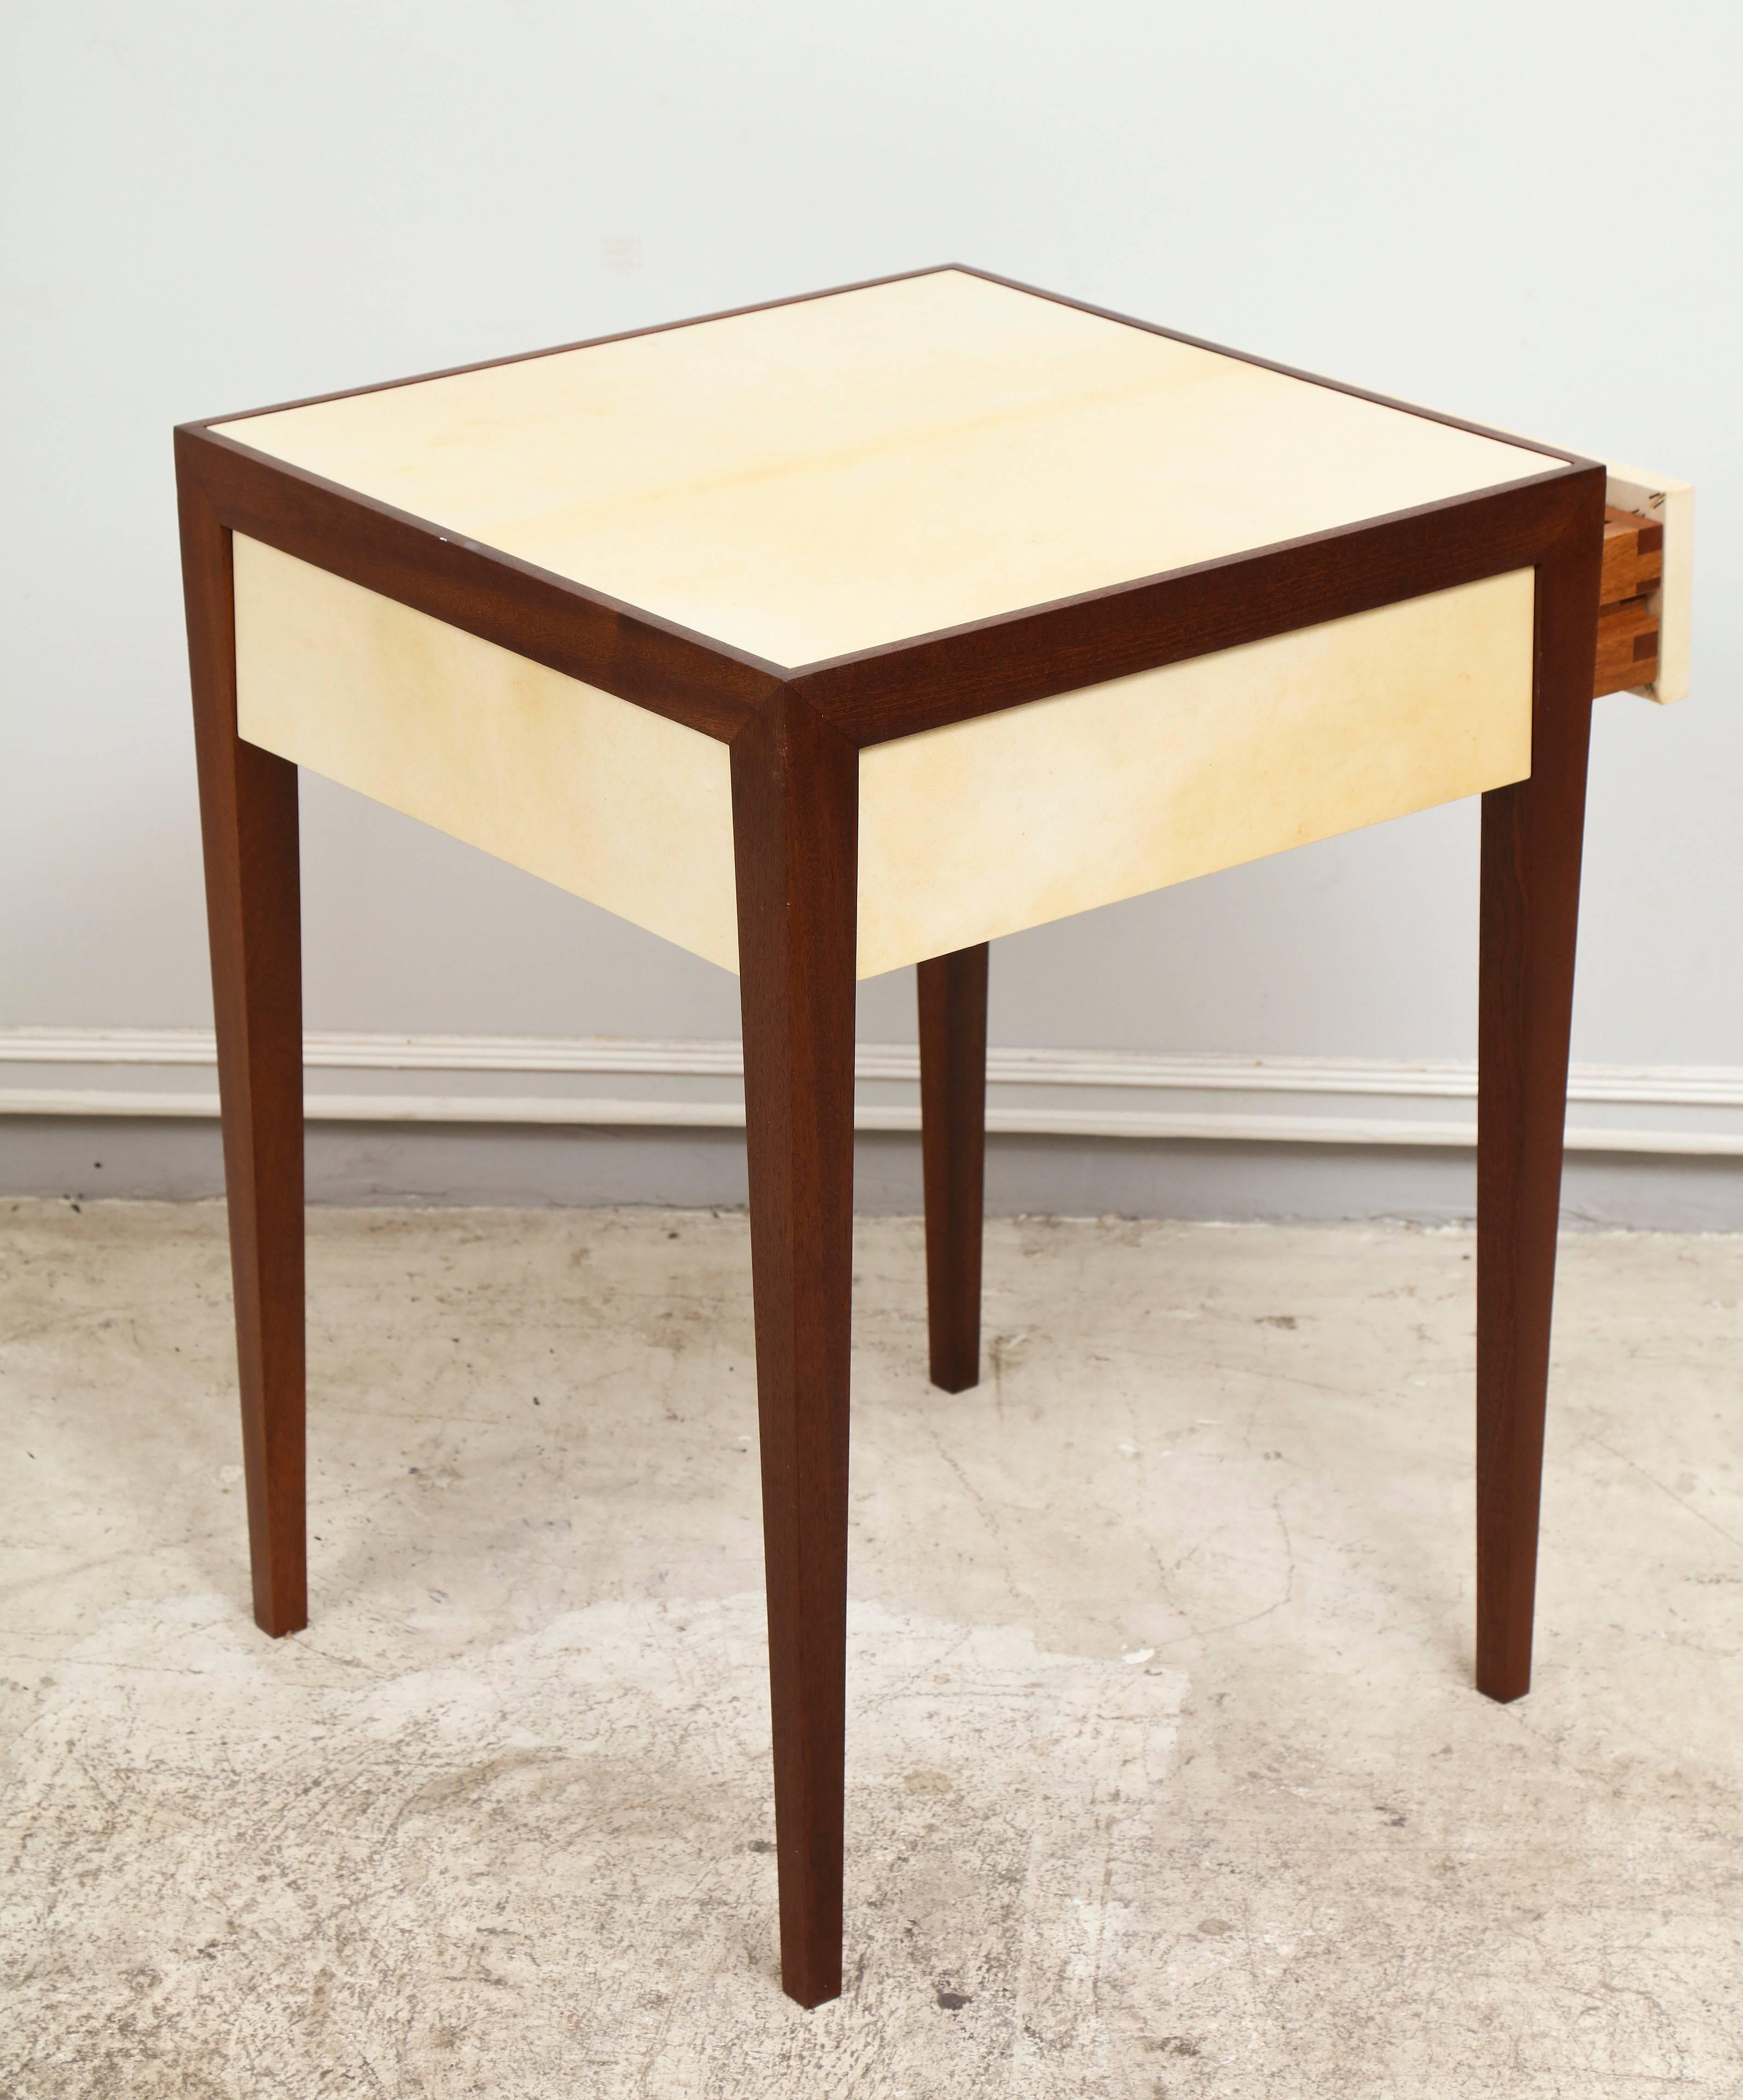 A custom mahogany end table with parchment top featuring a central drawer.
Lead Time for custom-made is 8-10 weeks.